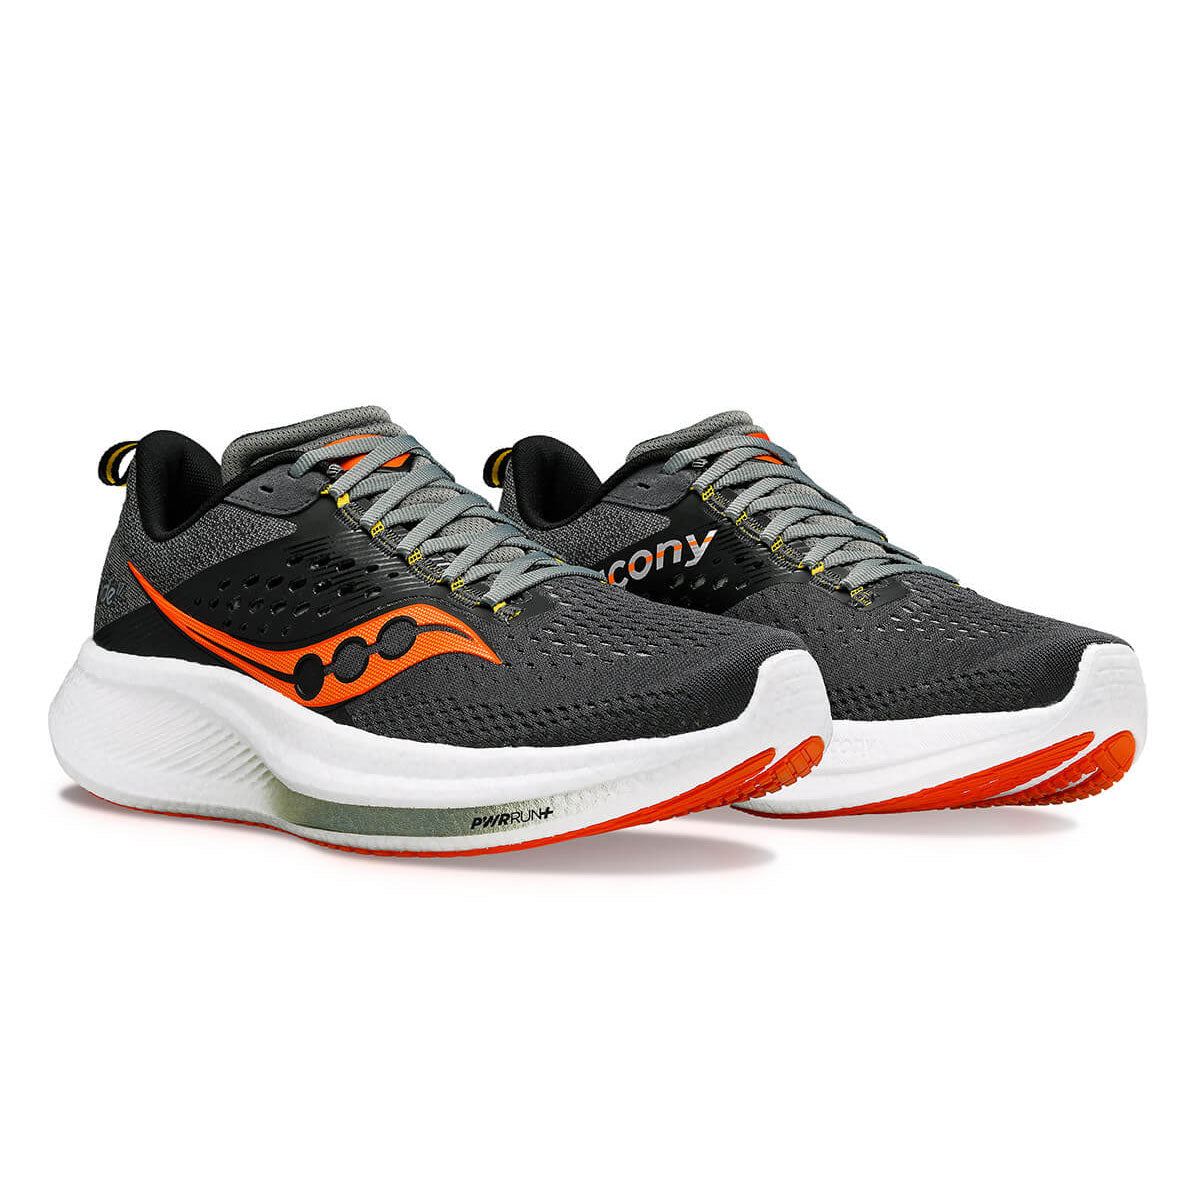 Saucony Ride 17 Running Shoes - Mens - Shadow/Pepper